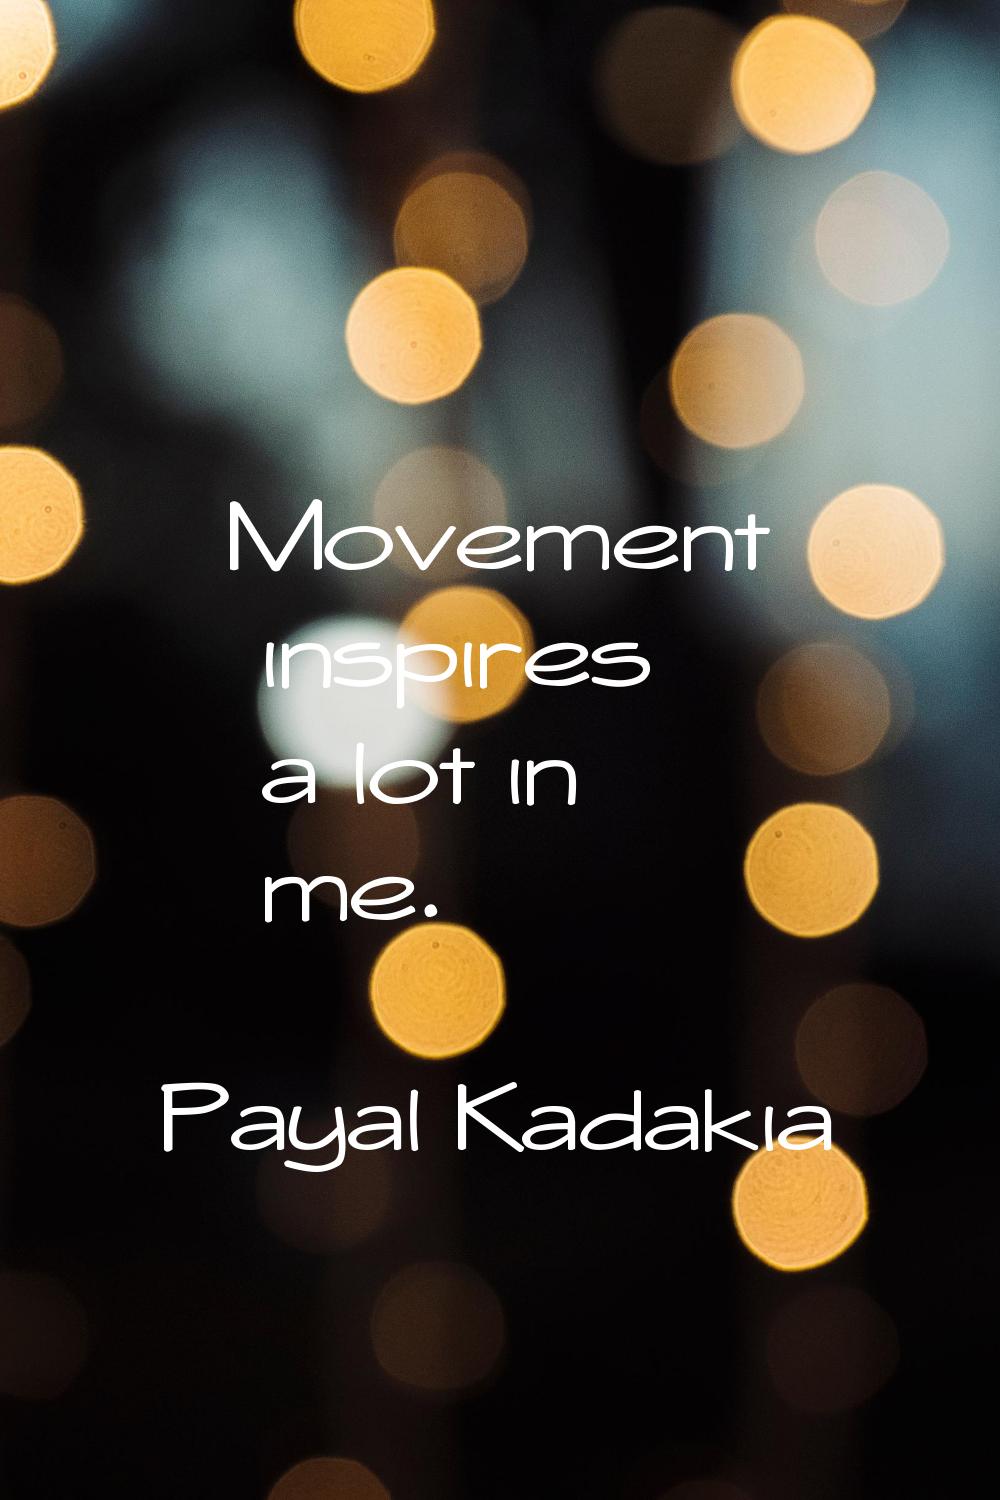 Movement inspires a lot in me.